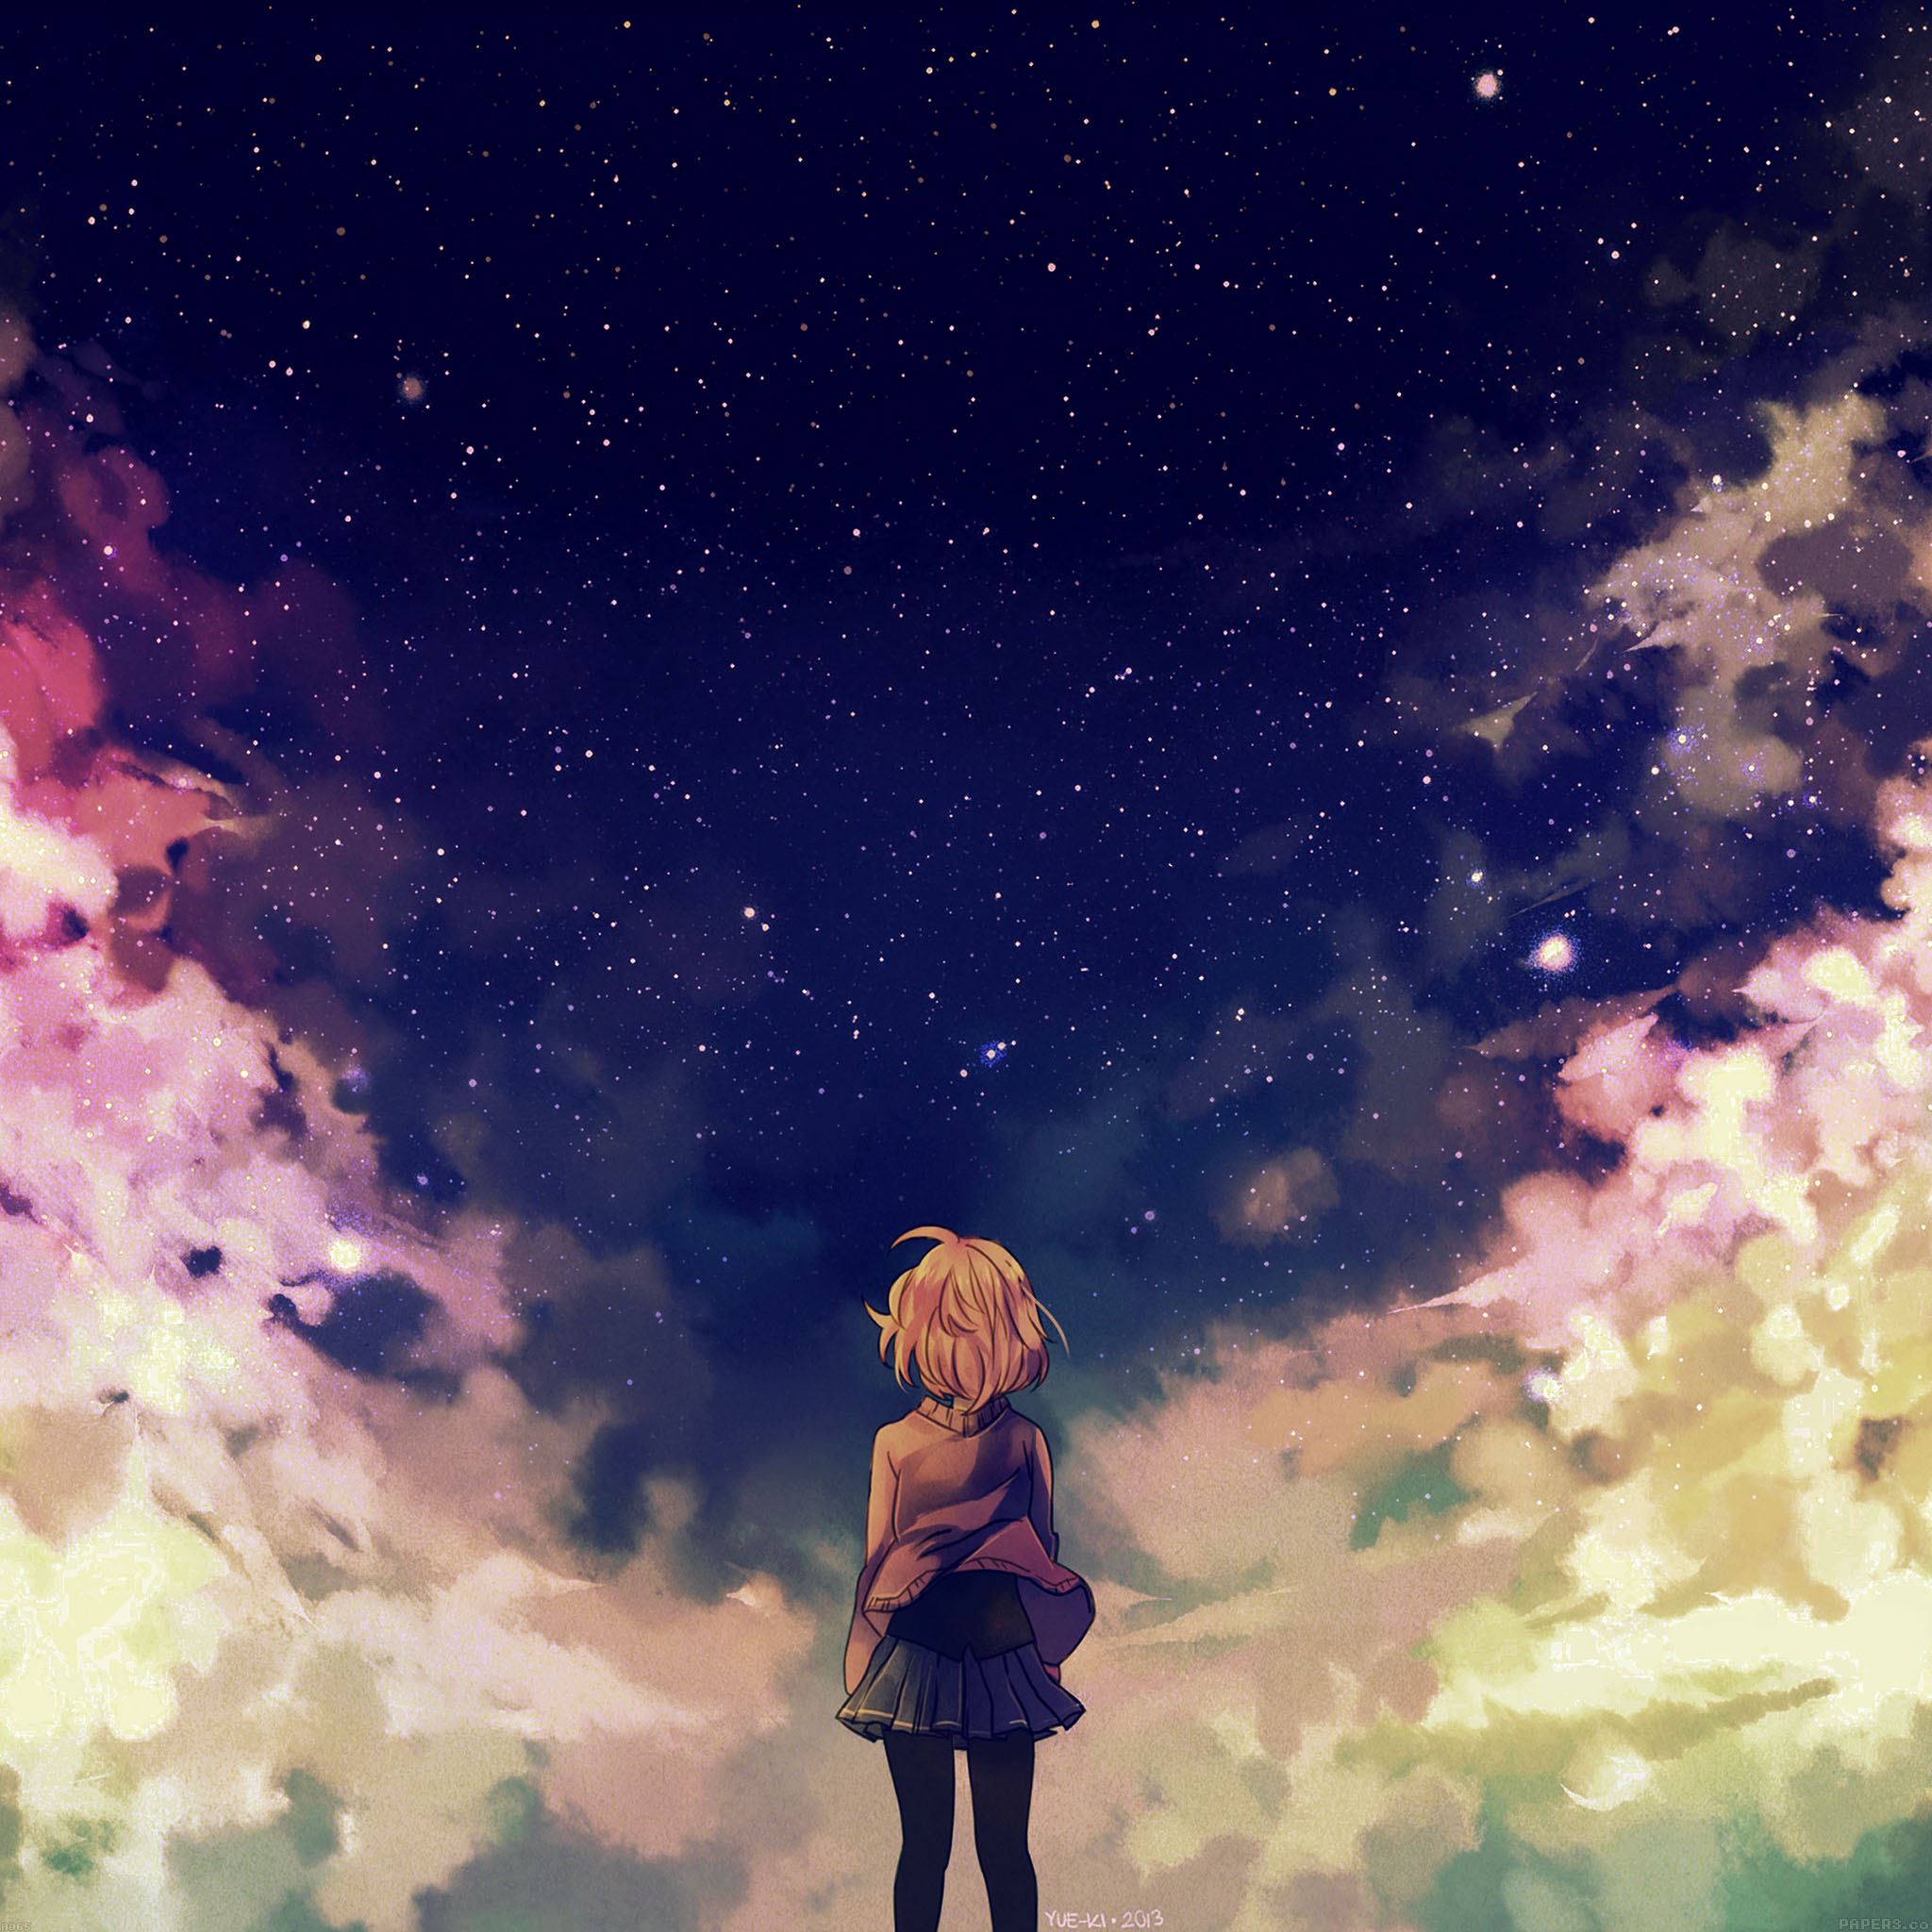 Starry space illust anime girl iPad Air Wallpapers Free Download